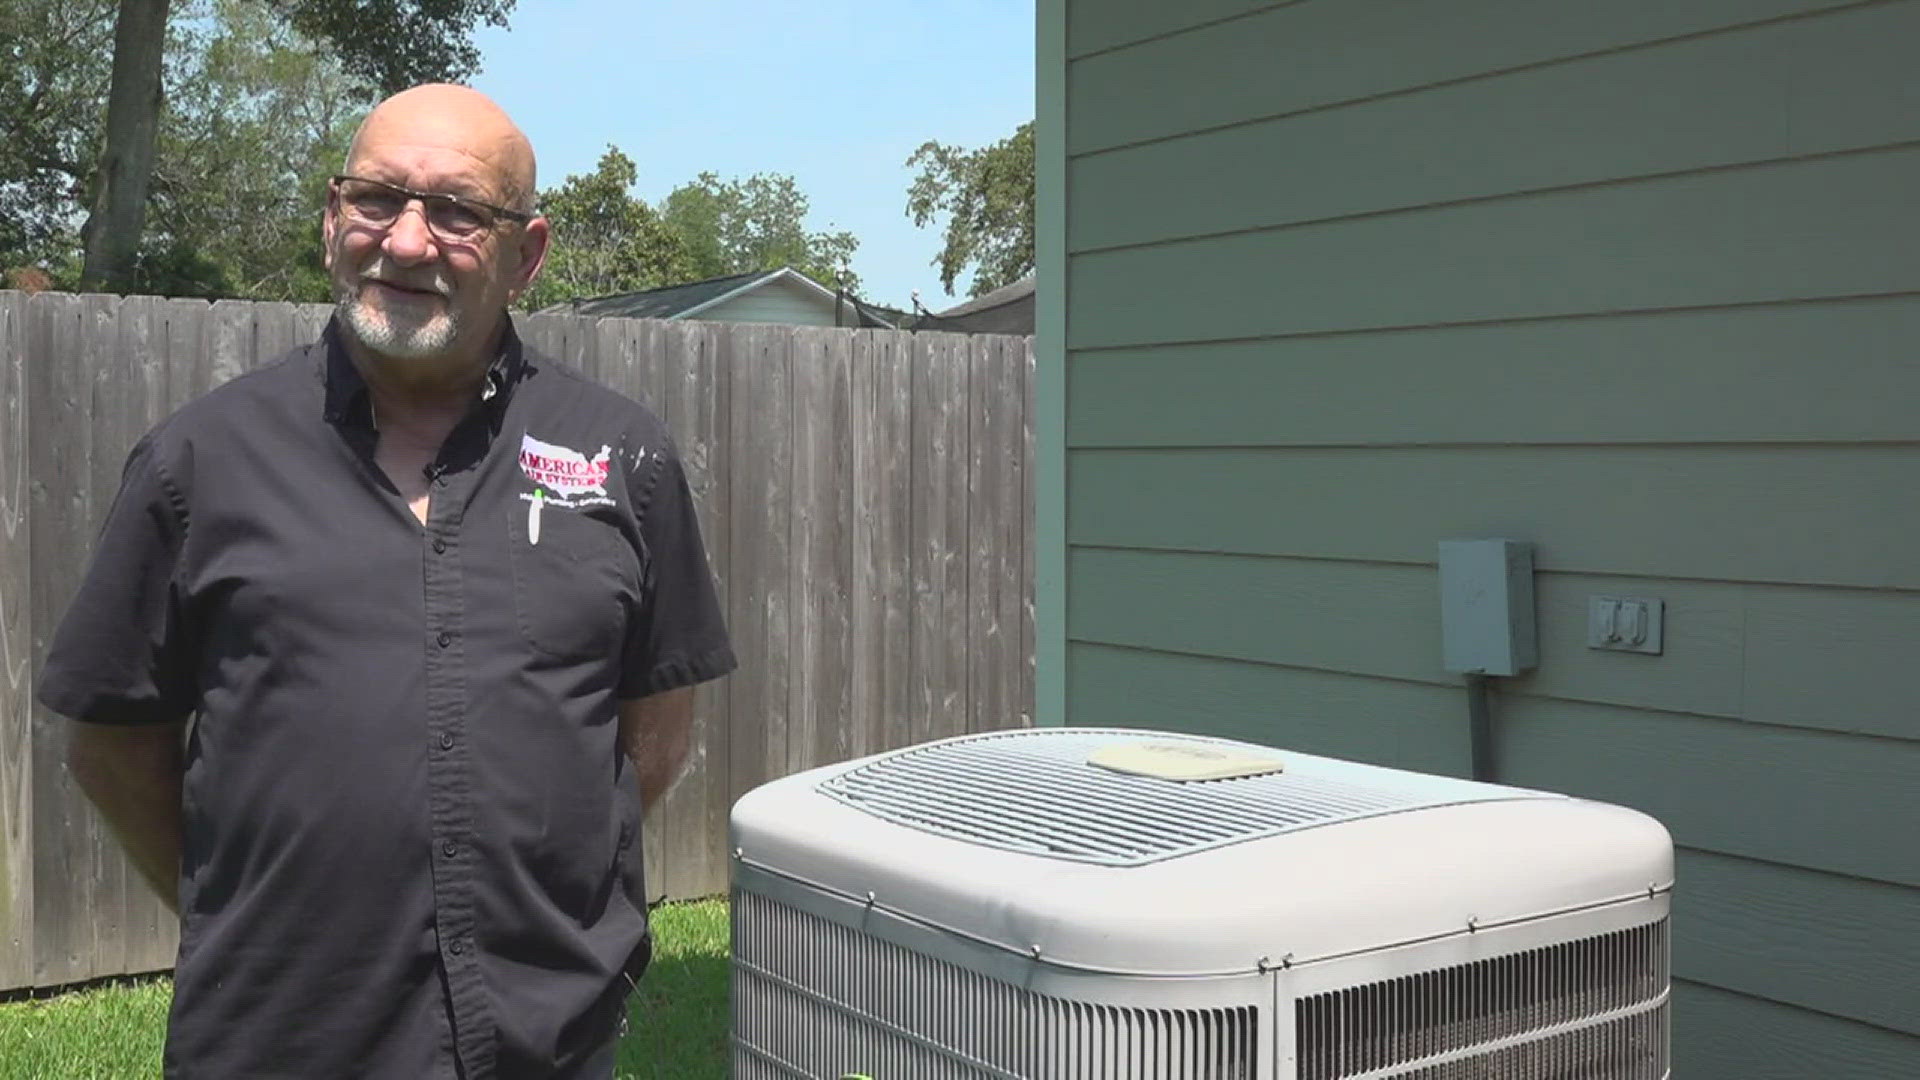 Experts say routine maintenance year round can go a long way in saving money on A/C costs.